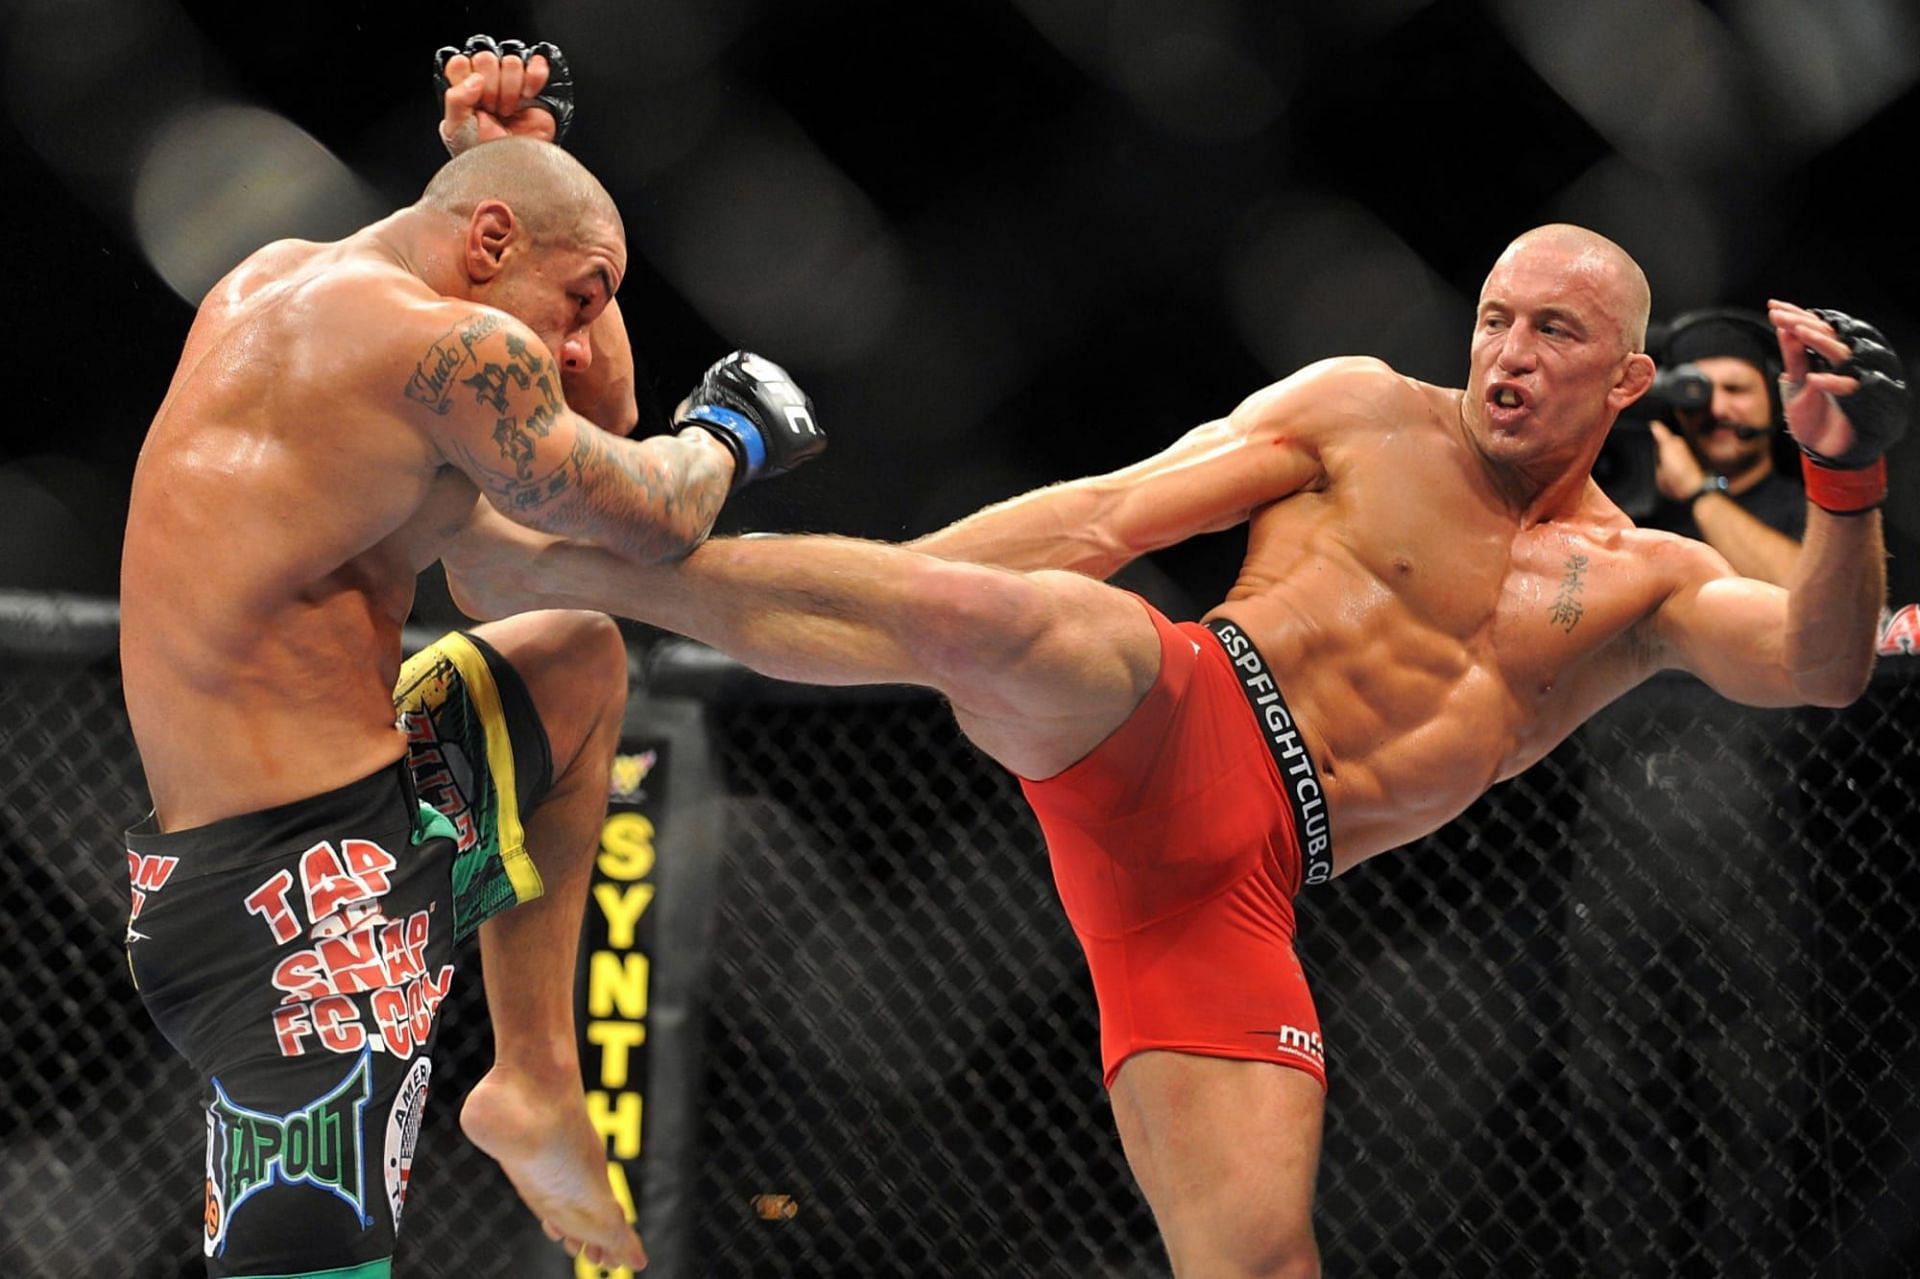 Georges St-Pierre was dominant over multiple generations of UFC greats